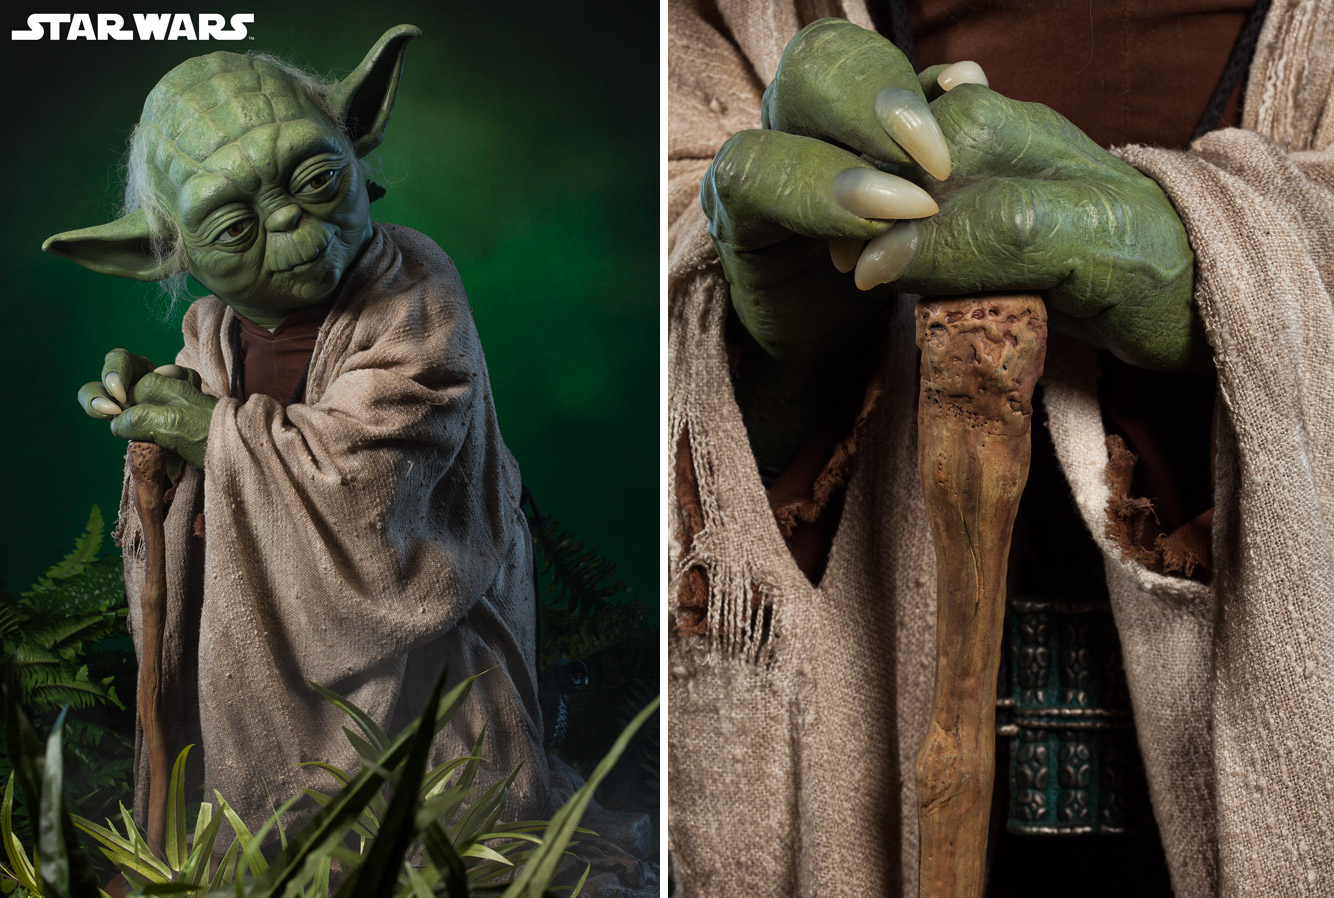 A Jedi Master Would Surely Approve Of Spending $3300 On This Life-Size Yoda